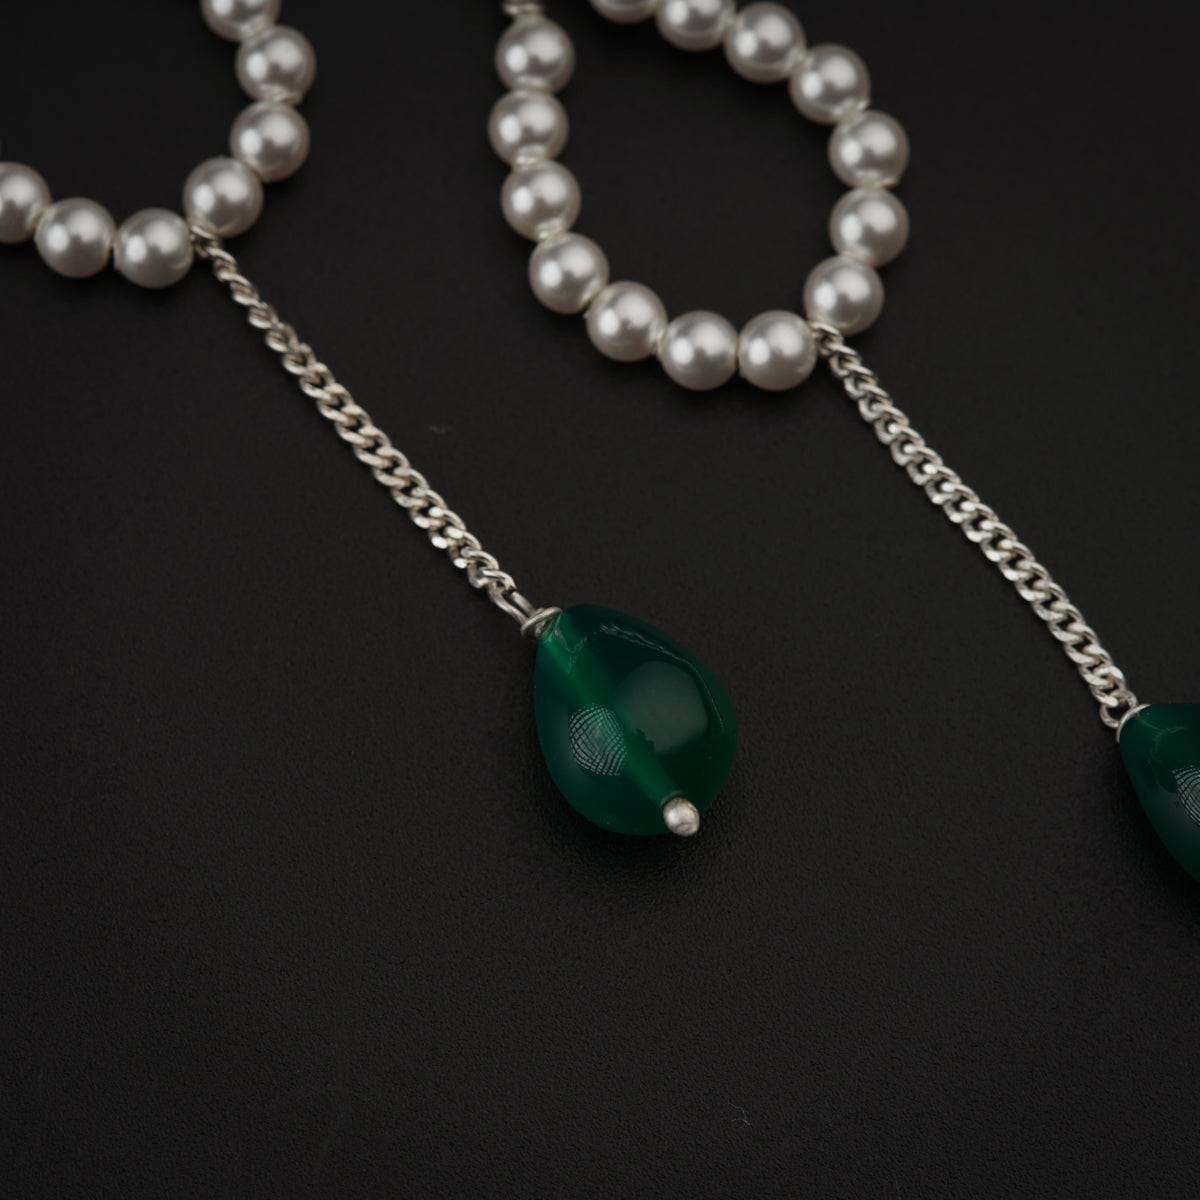 Green Onyx Drop Earring with Pearls